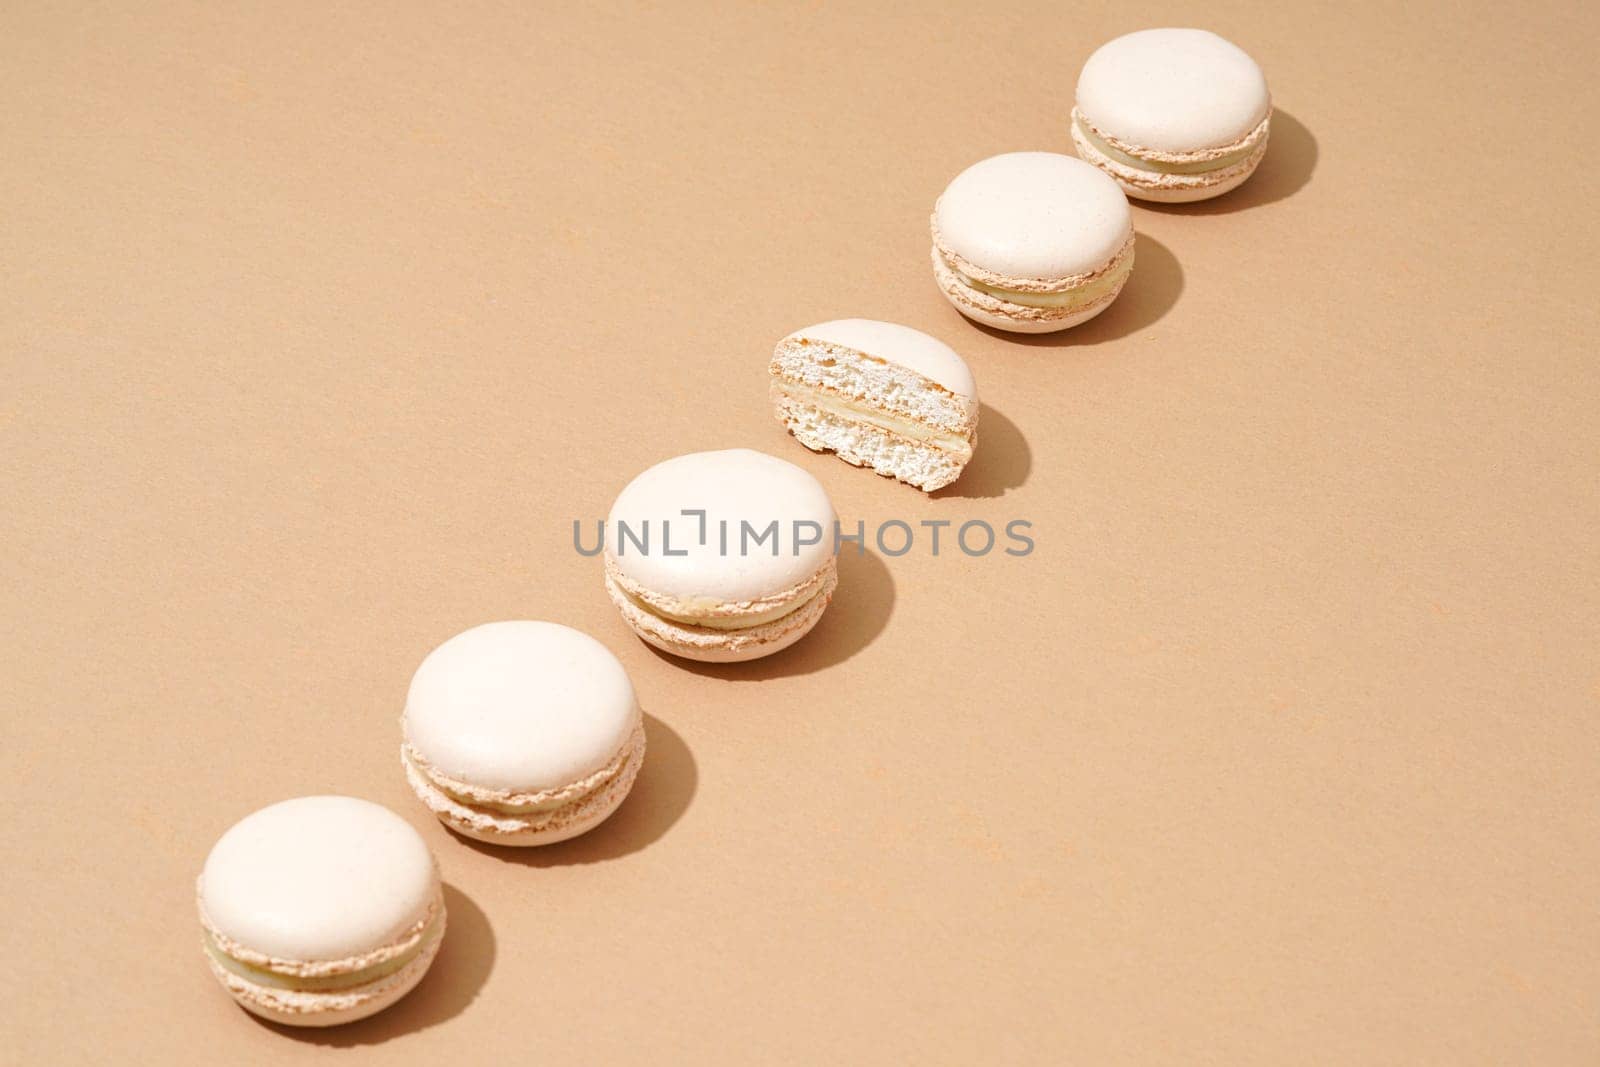 A still life image featuring six white macarons, arranged in a stack on top of each other